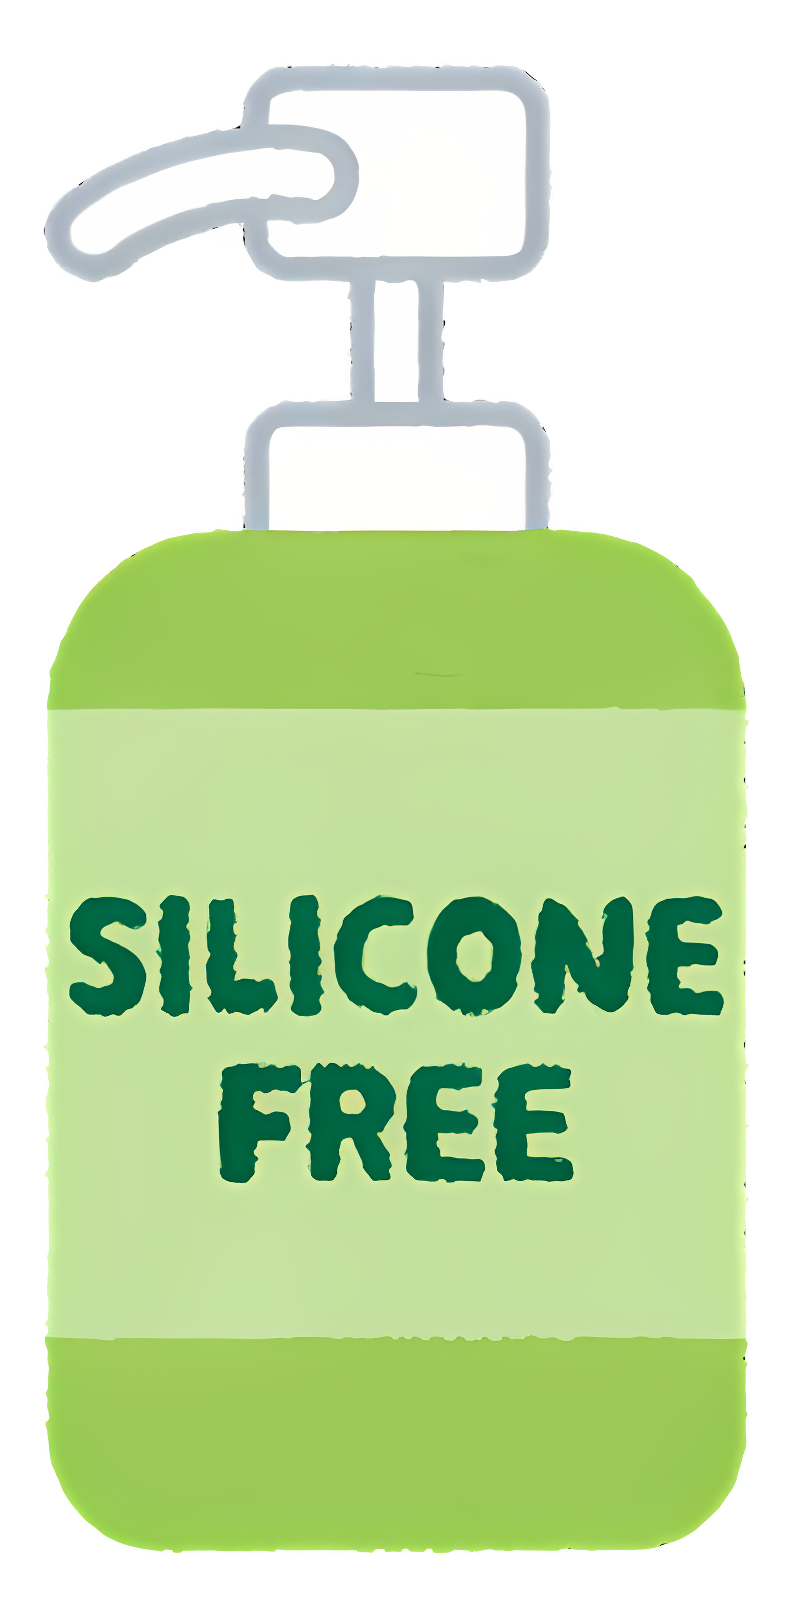 Green plastic bottle with "silicone free" label Clipart